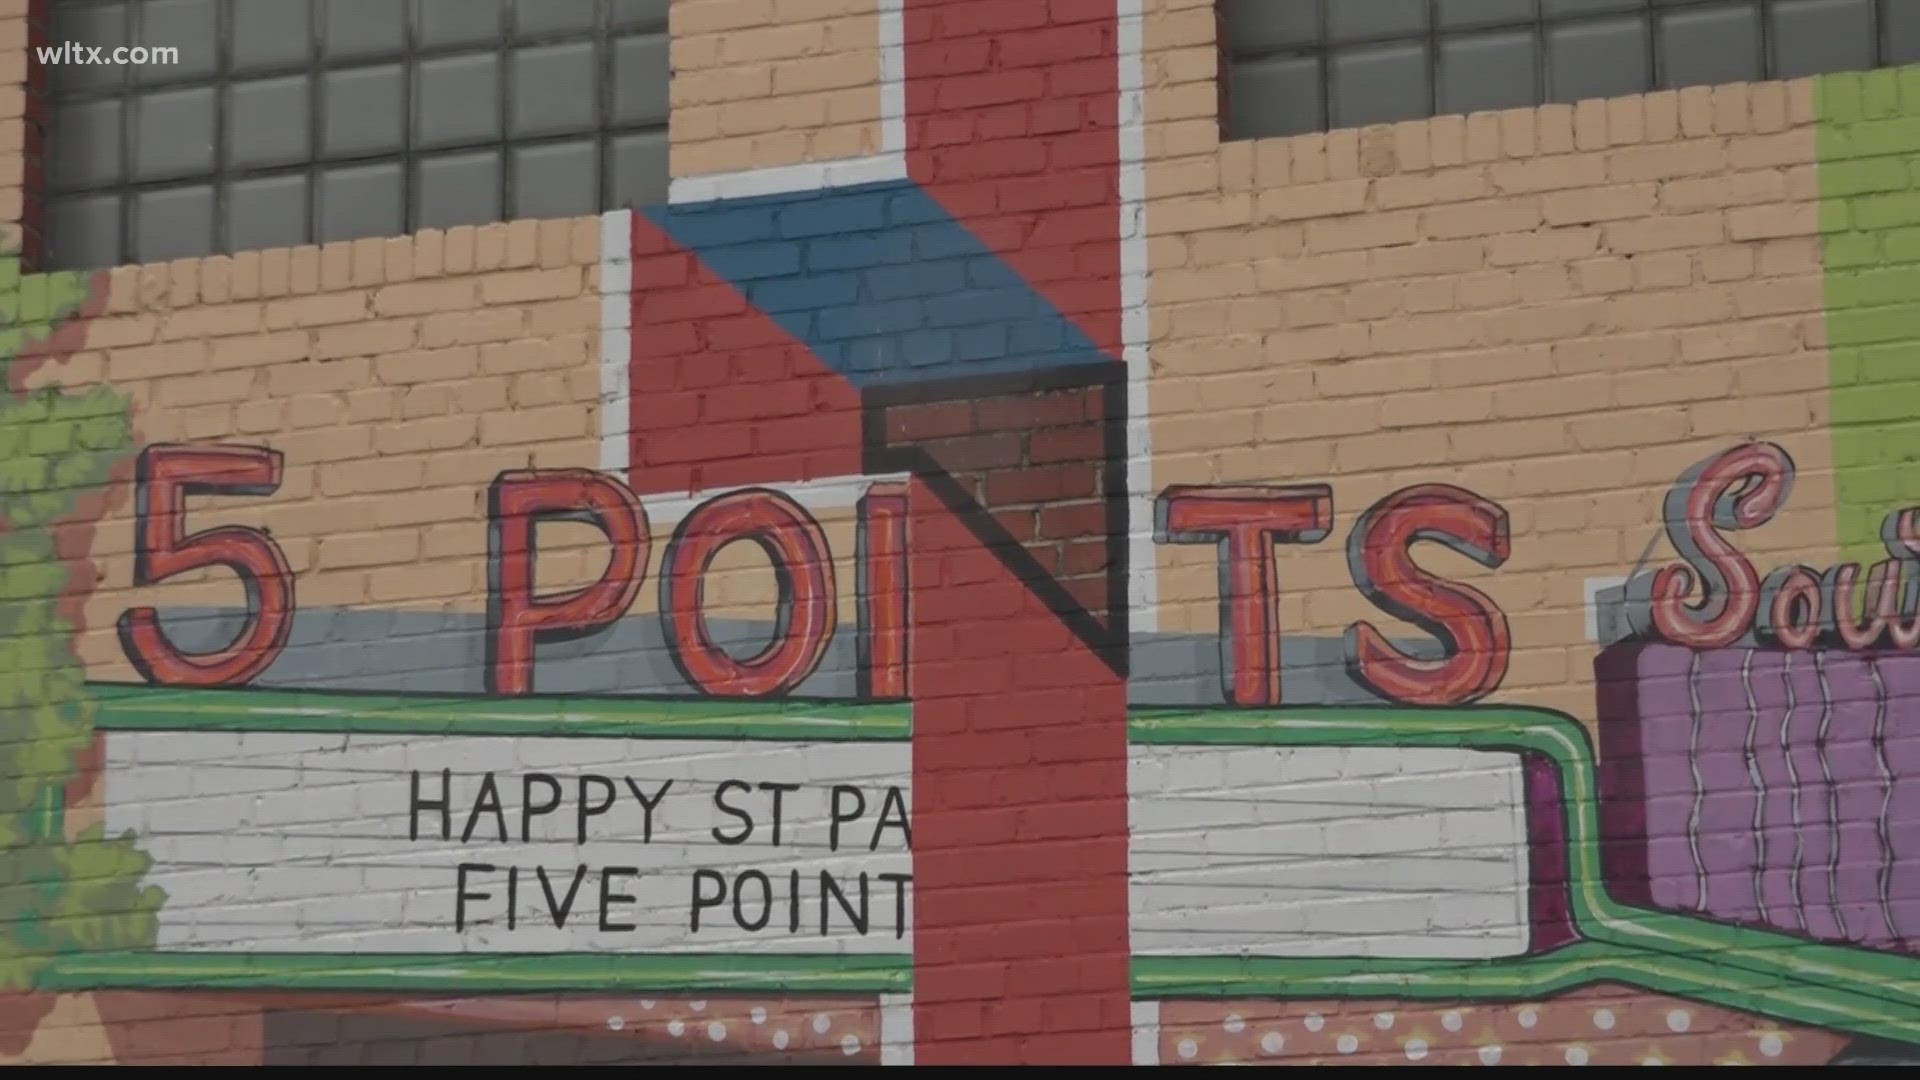 For over 100 years, Five Points has been one of the most the popular shopping and commercial districts in Columbia.